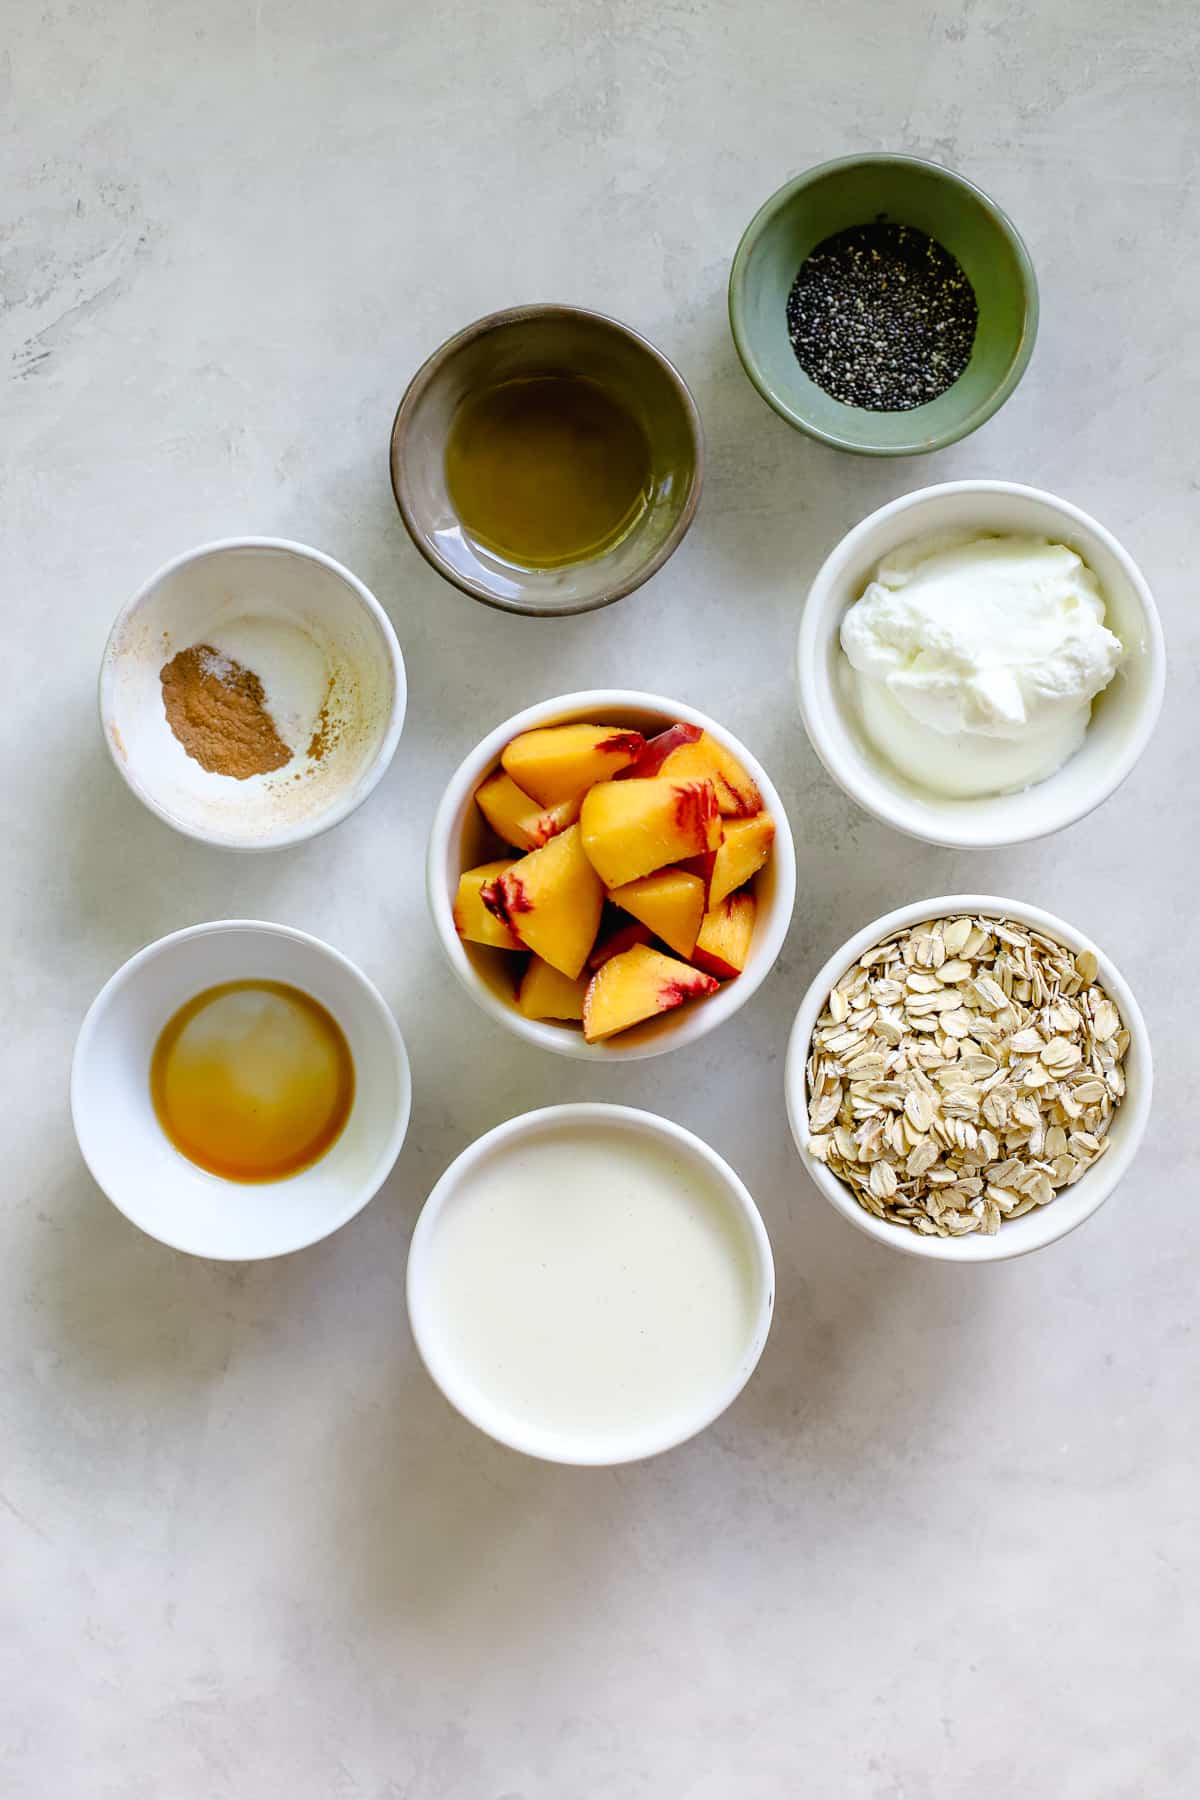 Peach pie overnight oats ingredients on light gray surface